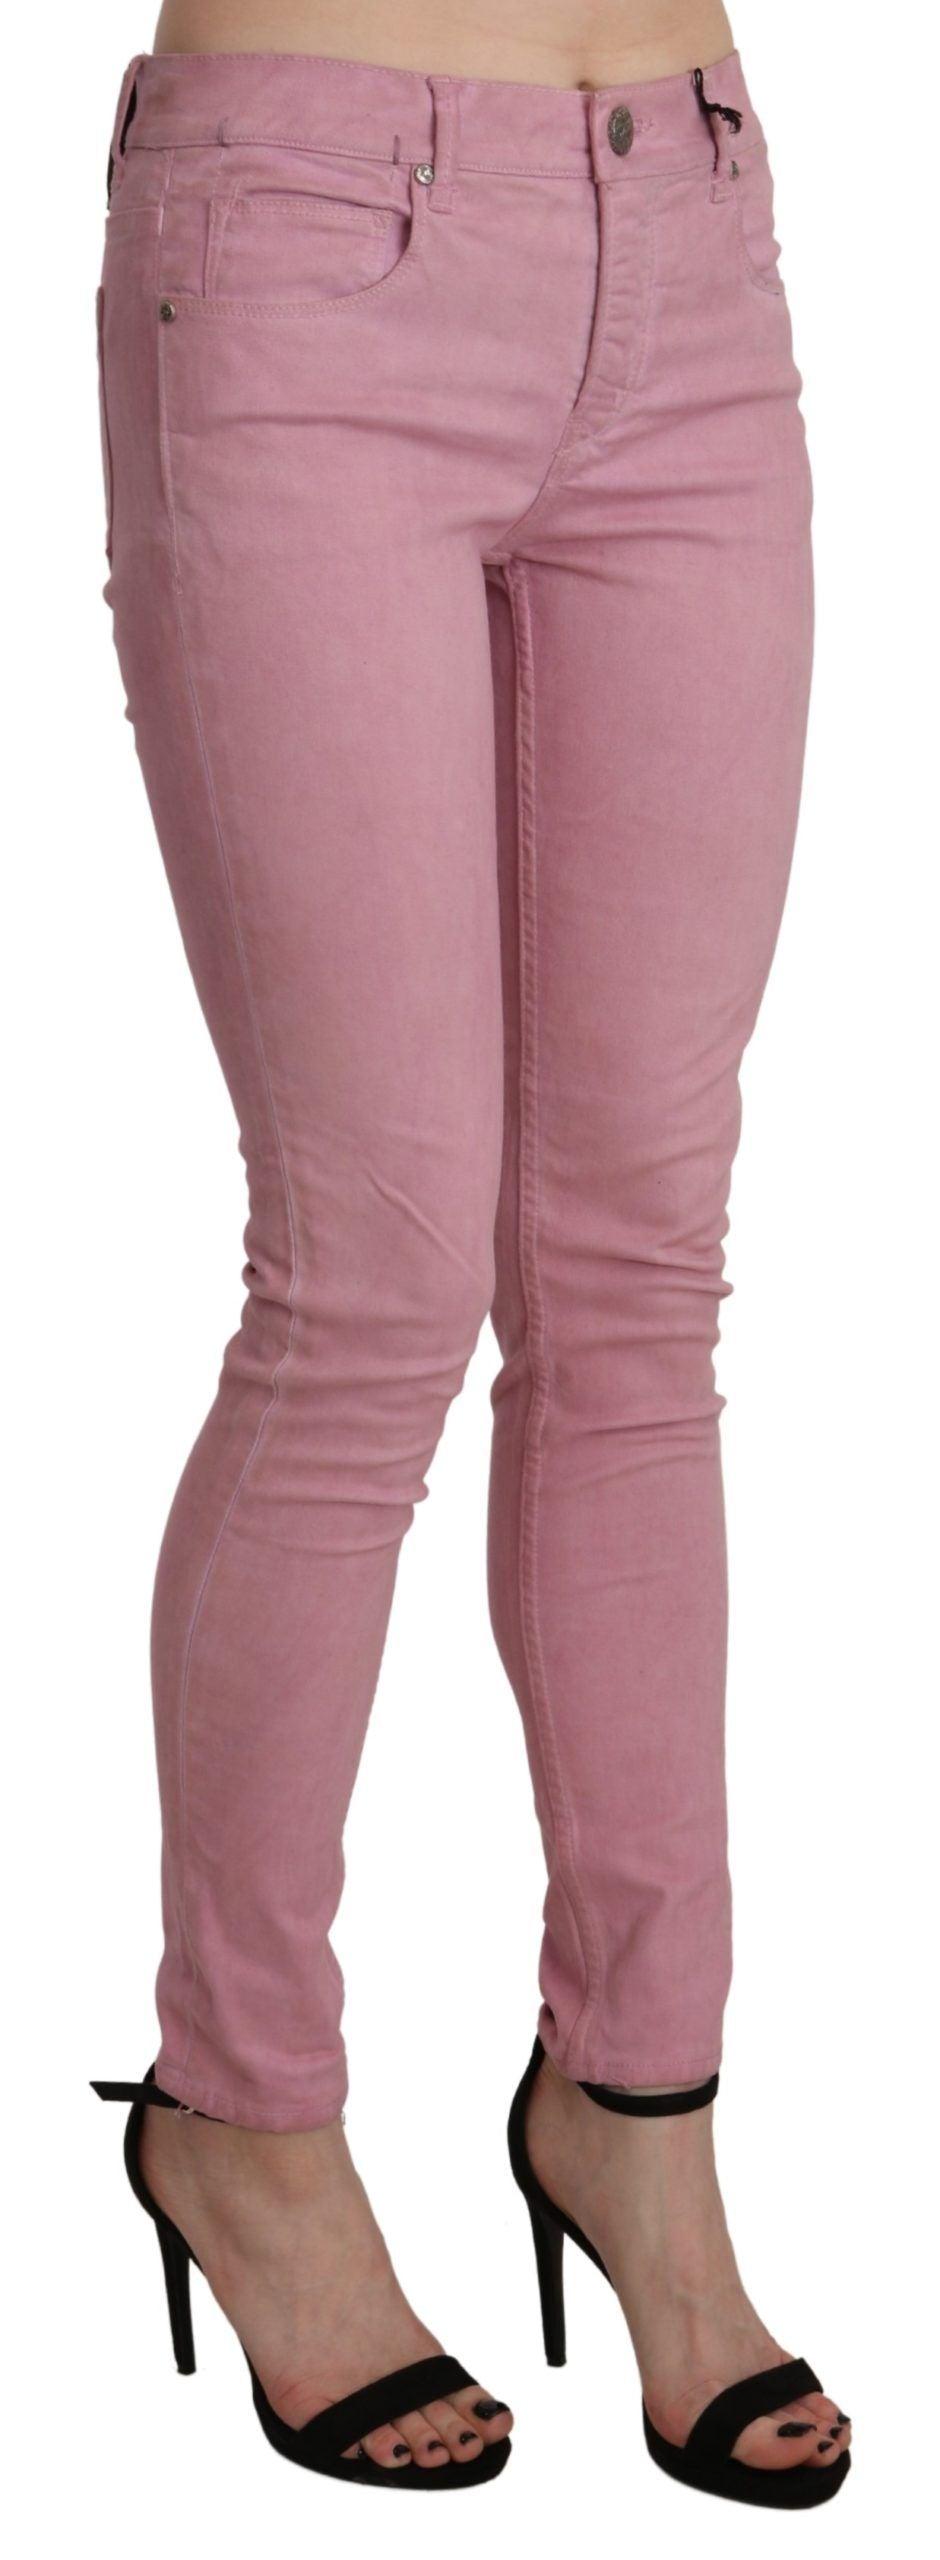 Acht Chic Pink Mid Waist Skinny Jeans - PER.FASHION